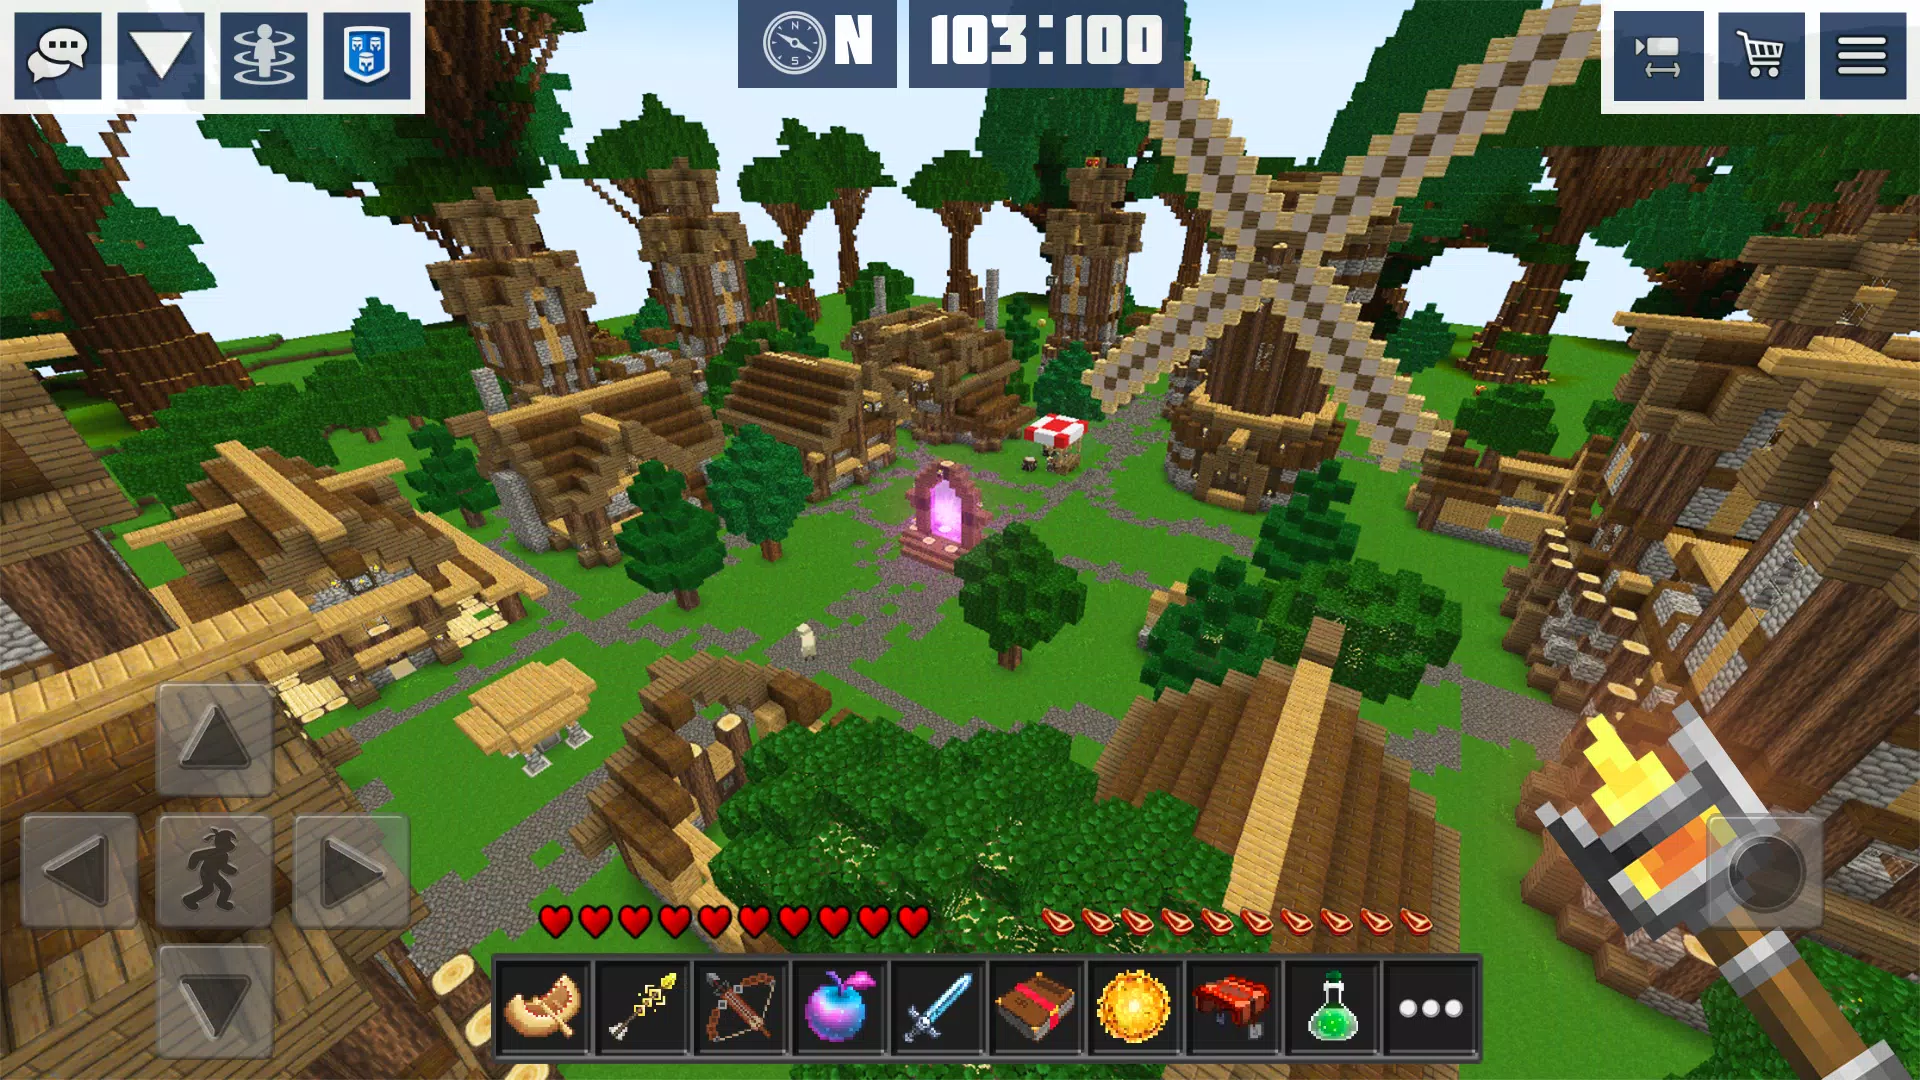 MainCraft: build & mine blocks APK (Android Game) - Free Download